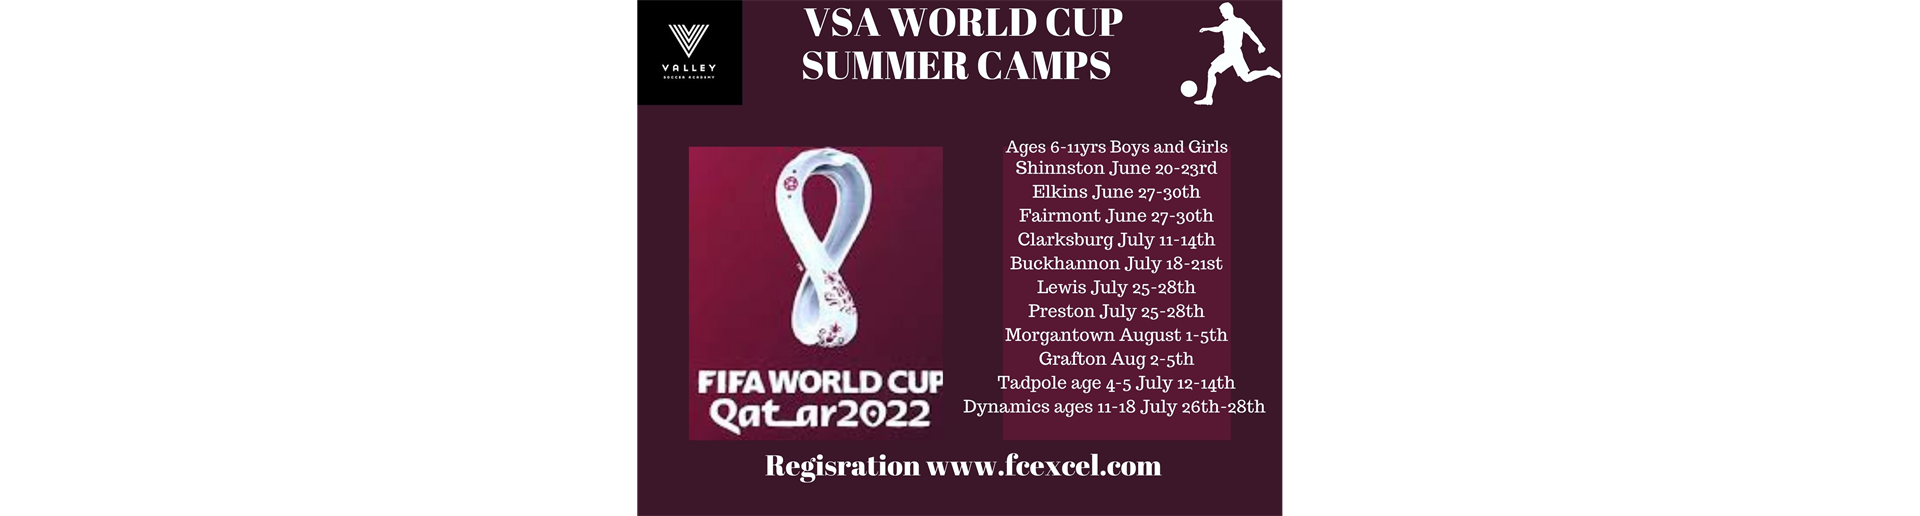 VSA World Cup Summer Camps are here!